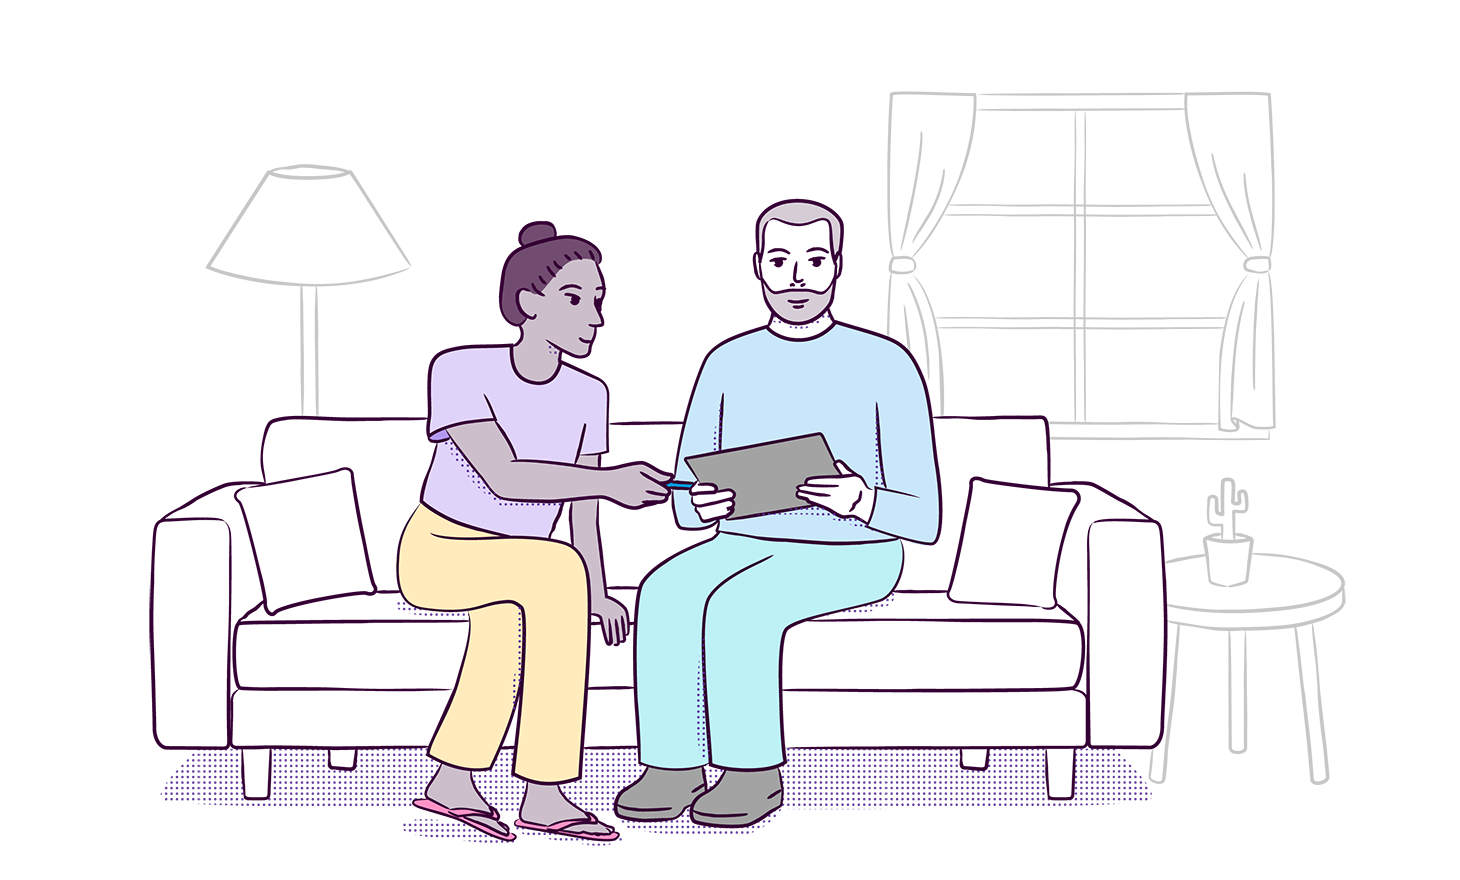 Illustration of two people sitting on a couch looking at a device